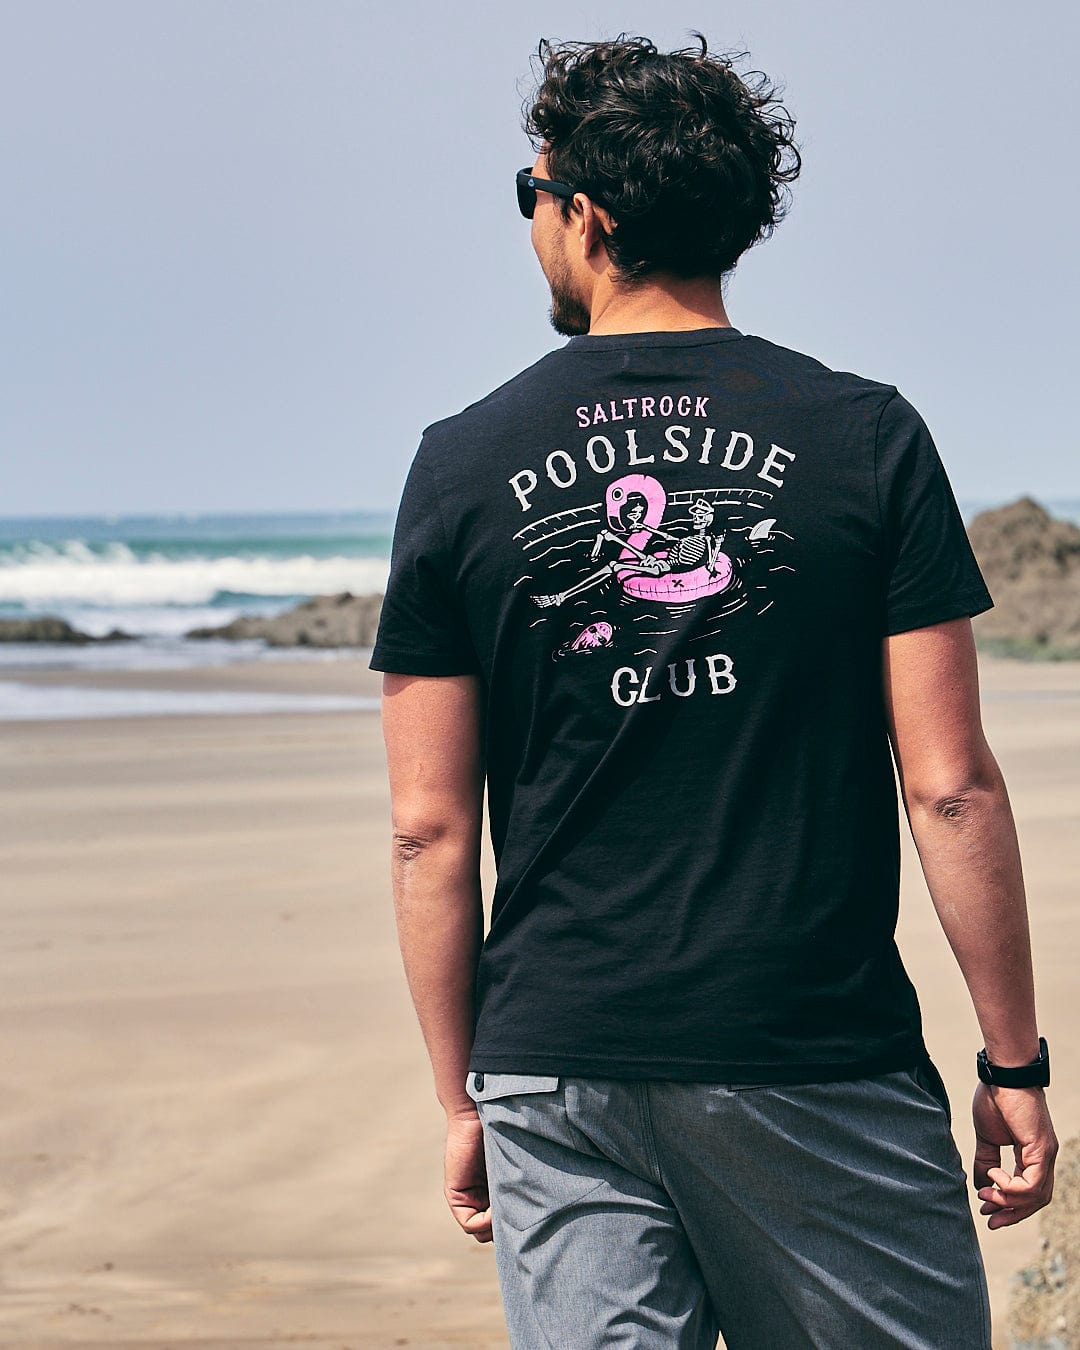 A man walking on the beach wearing a Saltrock Poolside Club Mens Short Sleeve T-Shirt in Black with a pink flamingo on it.